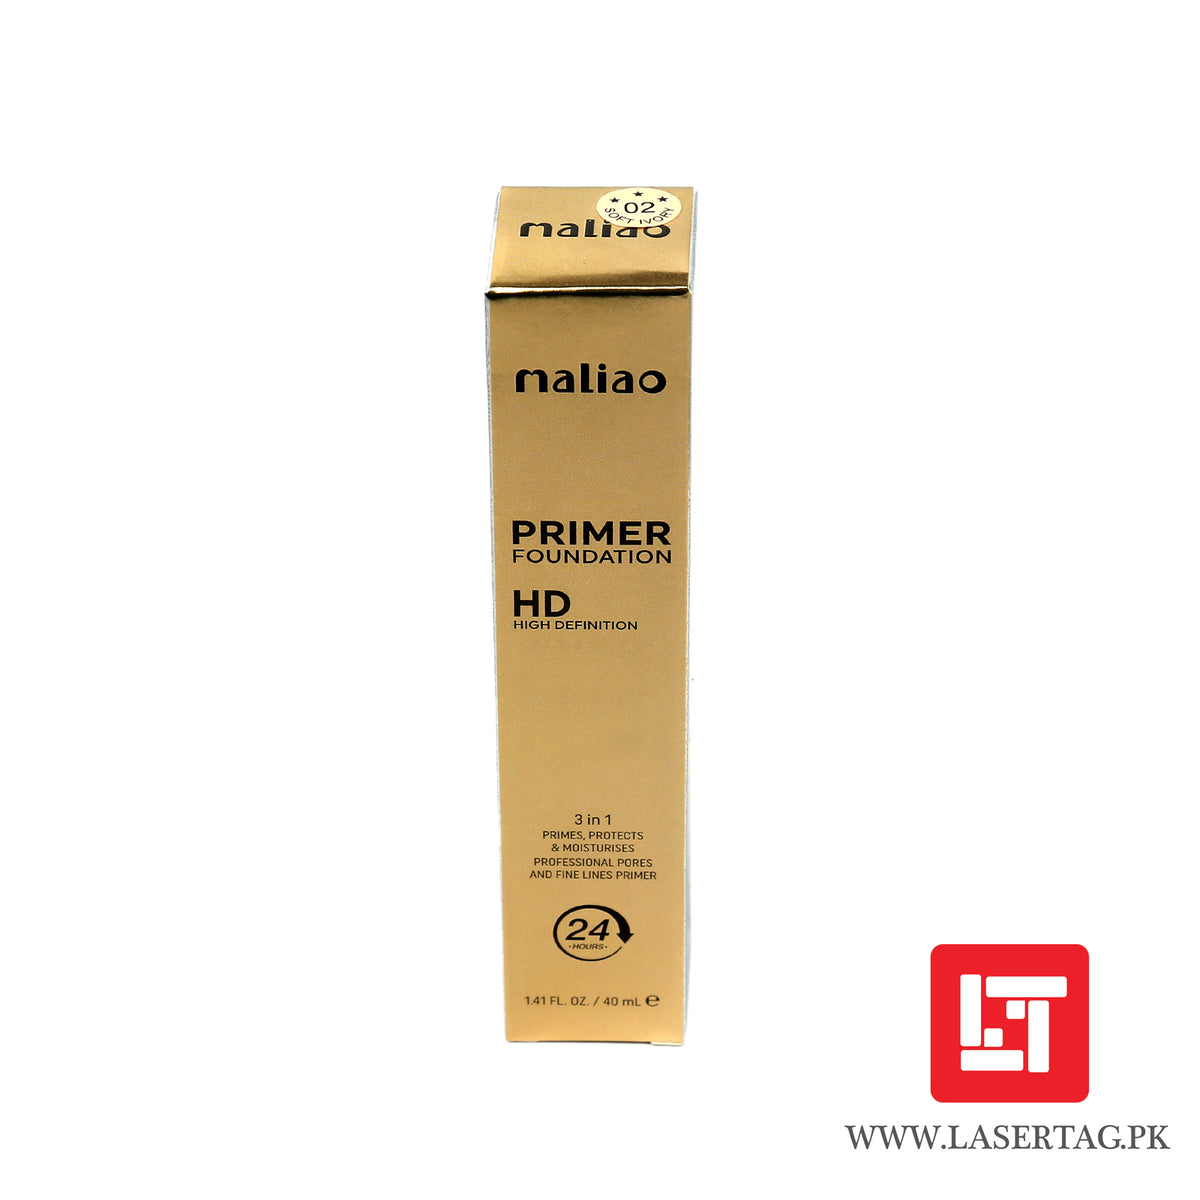 Maliao Primer Foundation HD High Definition 3 In 1 PRimes, Protects &amp; Moisturises Soft Ivory M175-02 40ml freeshipping - lasertag.pk